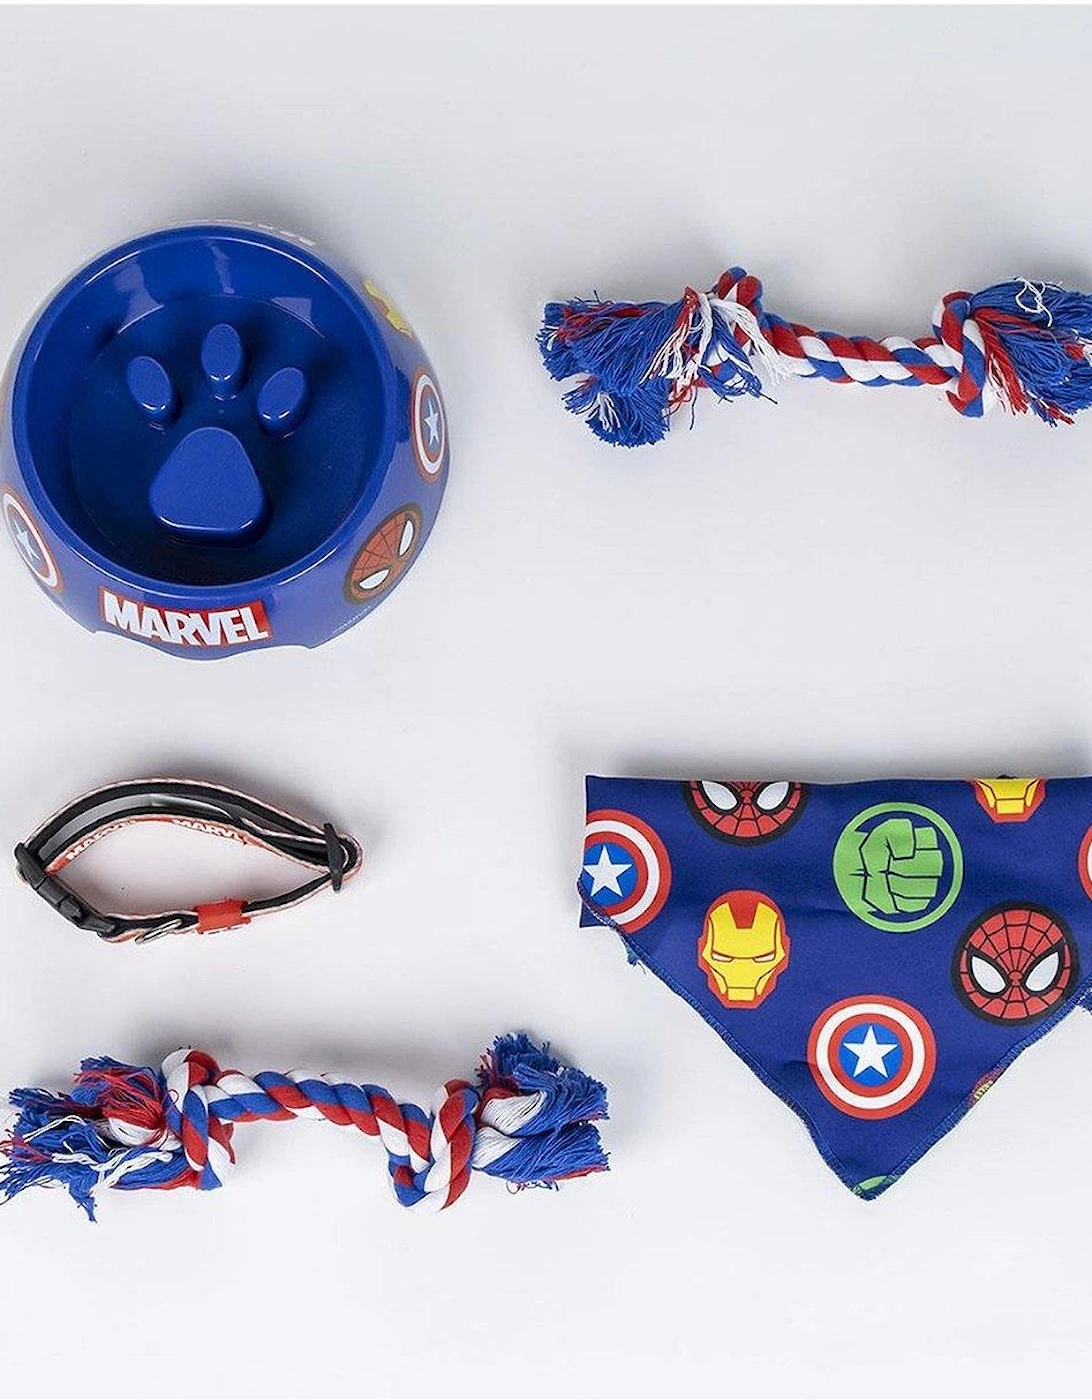 PUPPY WELCOME PACK - To include a Bowl, Collar, Teething Toys and Bandana